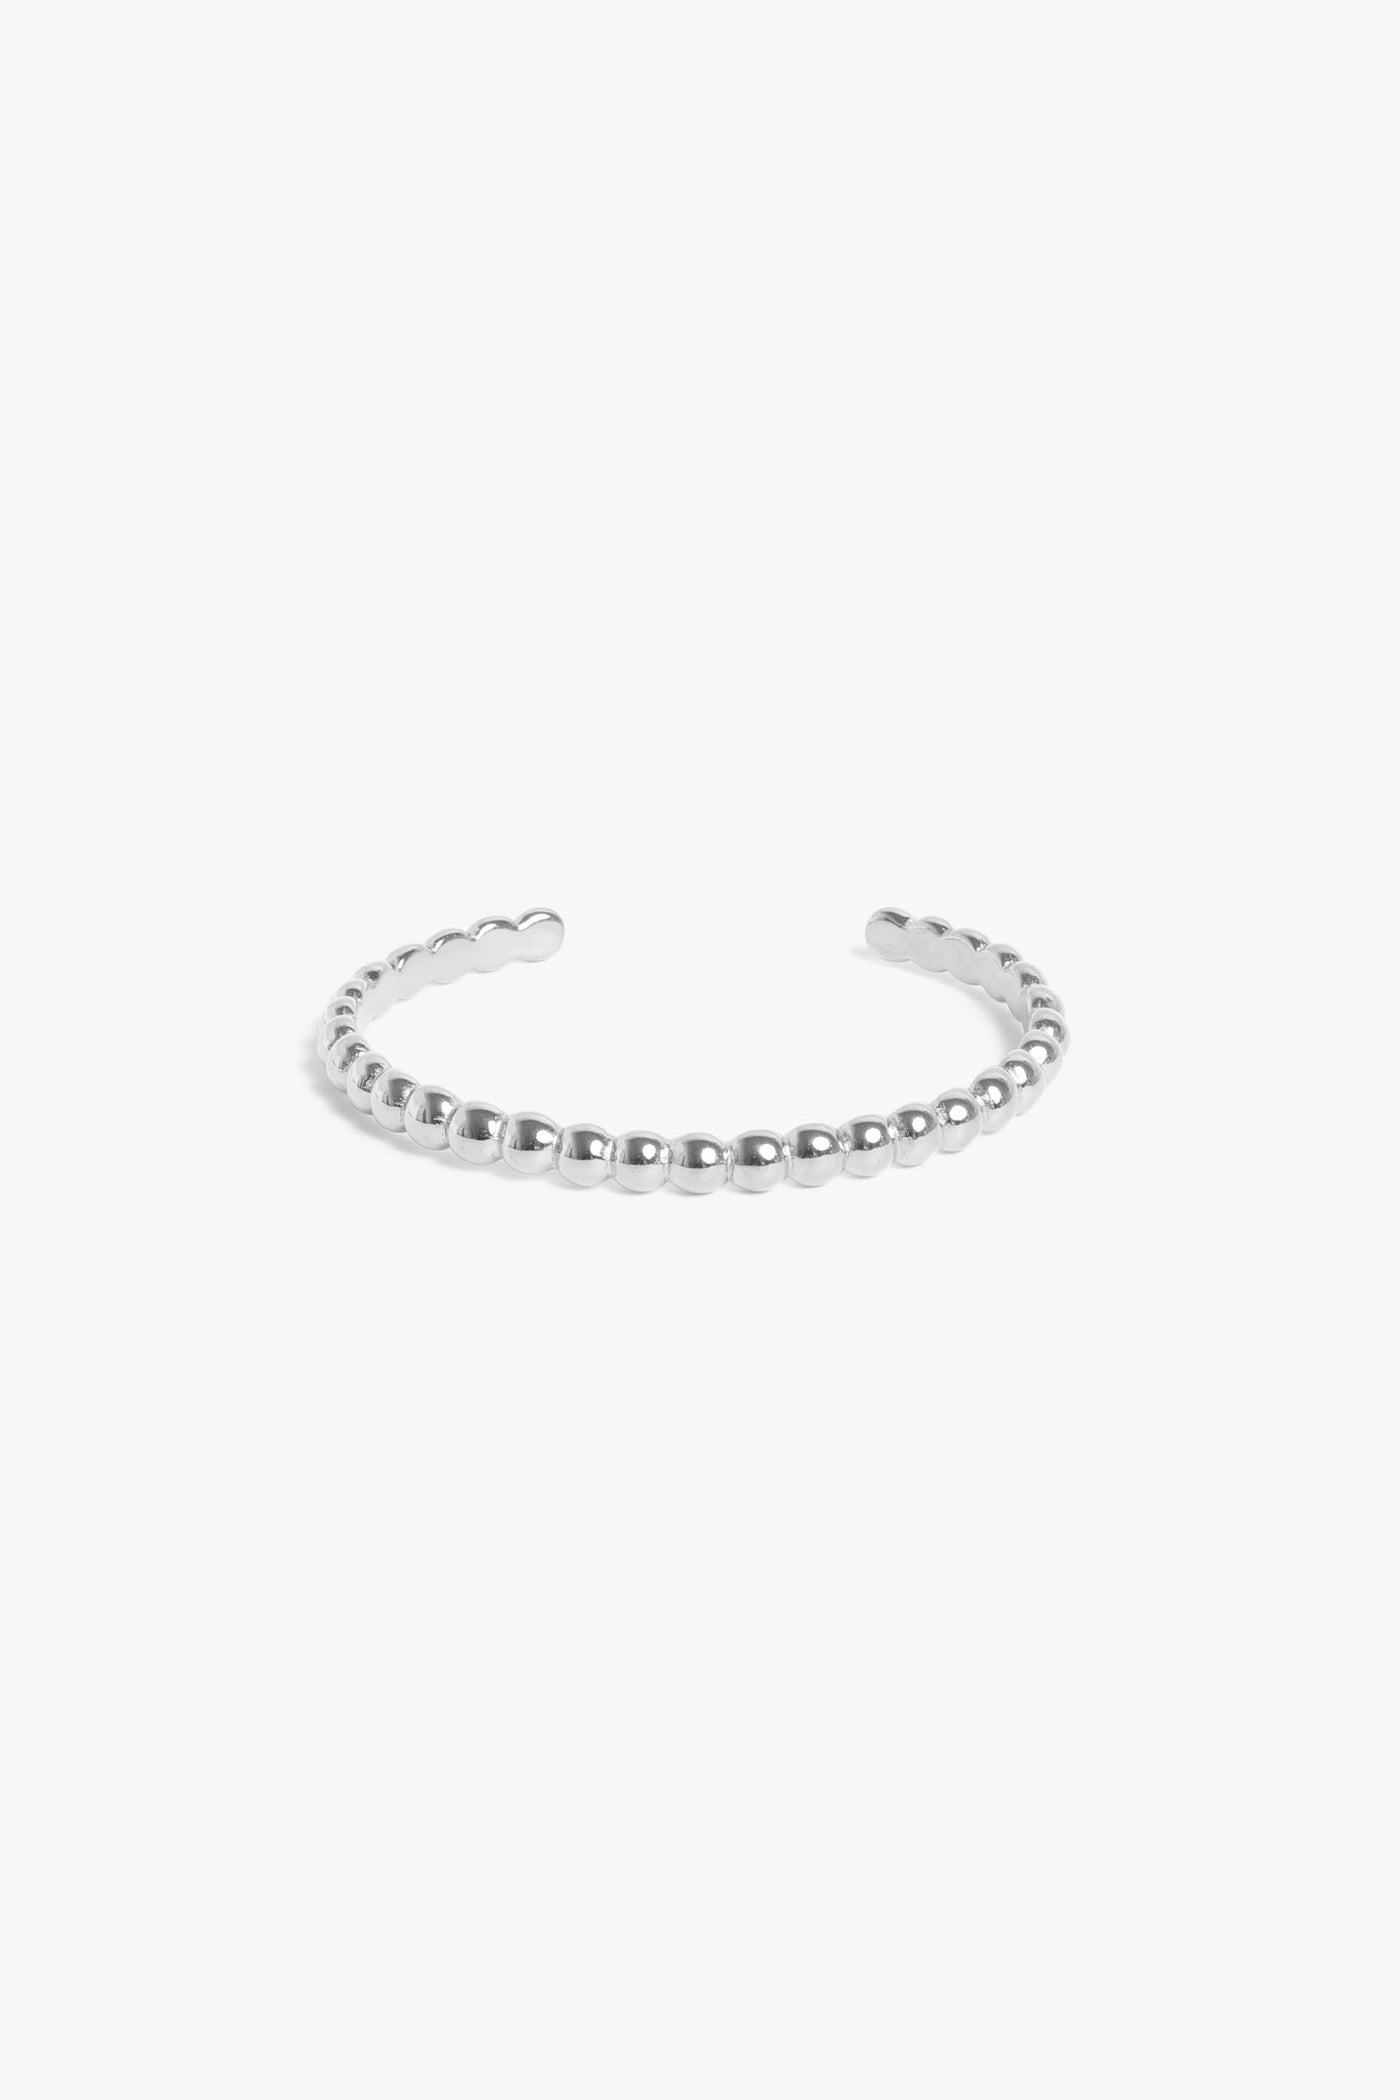 Marrin Costello Jewelry Crown XL Cuff dot adjustable bracelet. Waterproof, sustainable, hypoallergenic. Polished stainless steel.